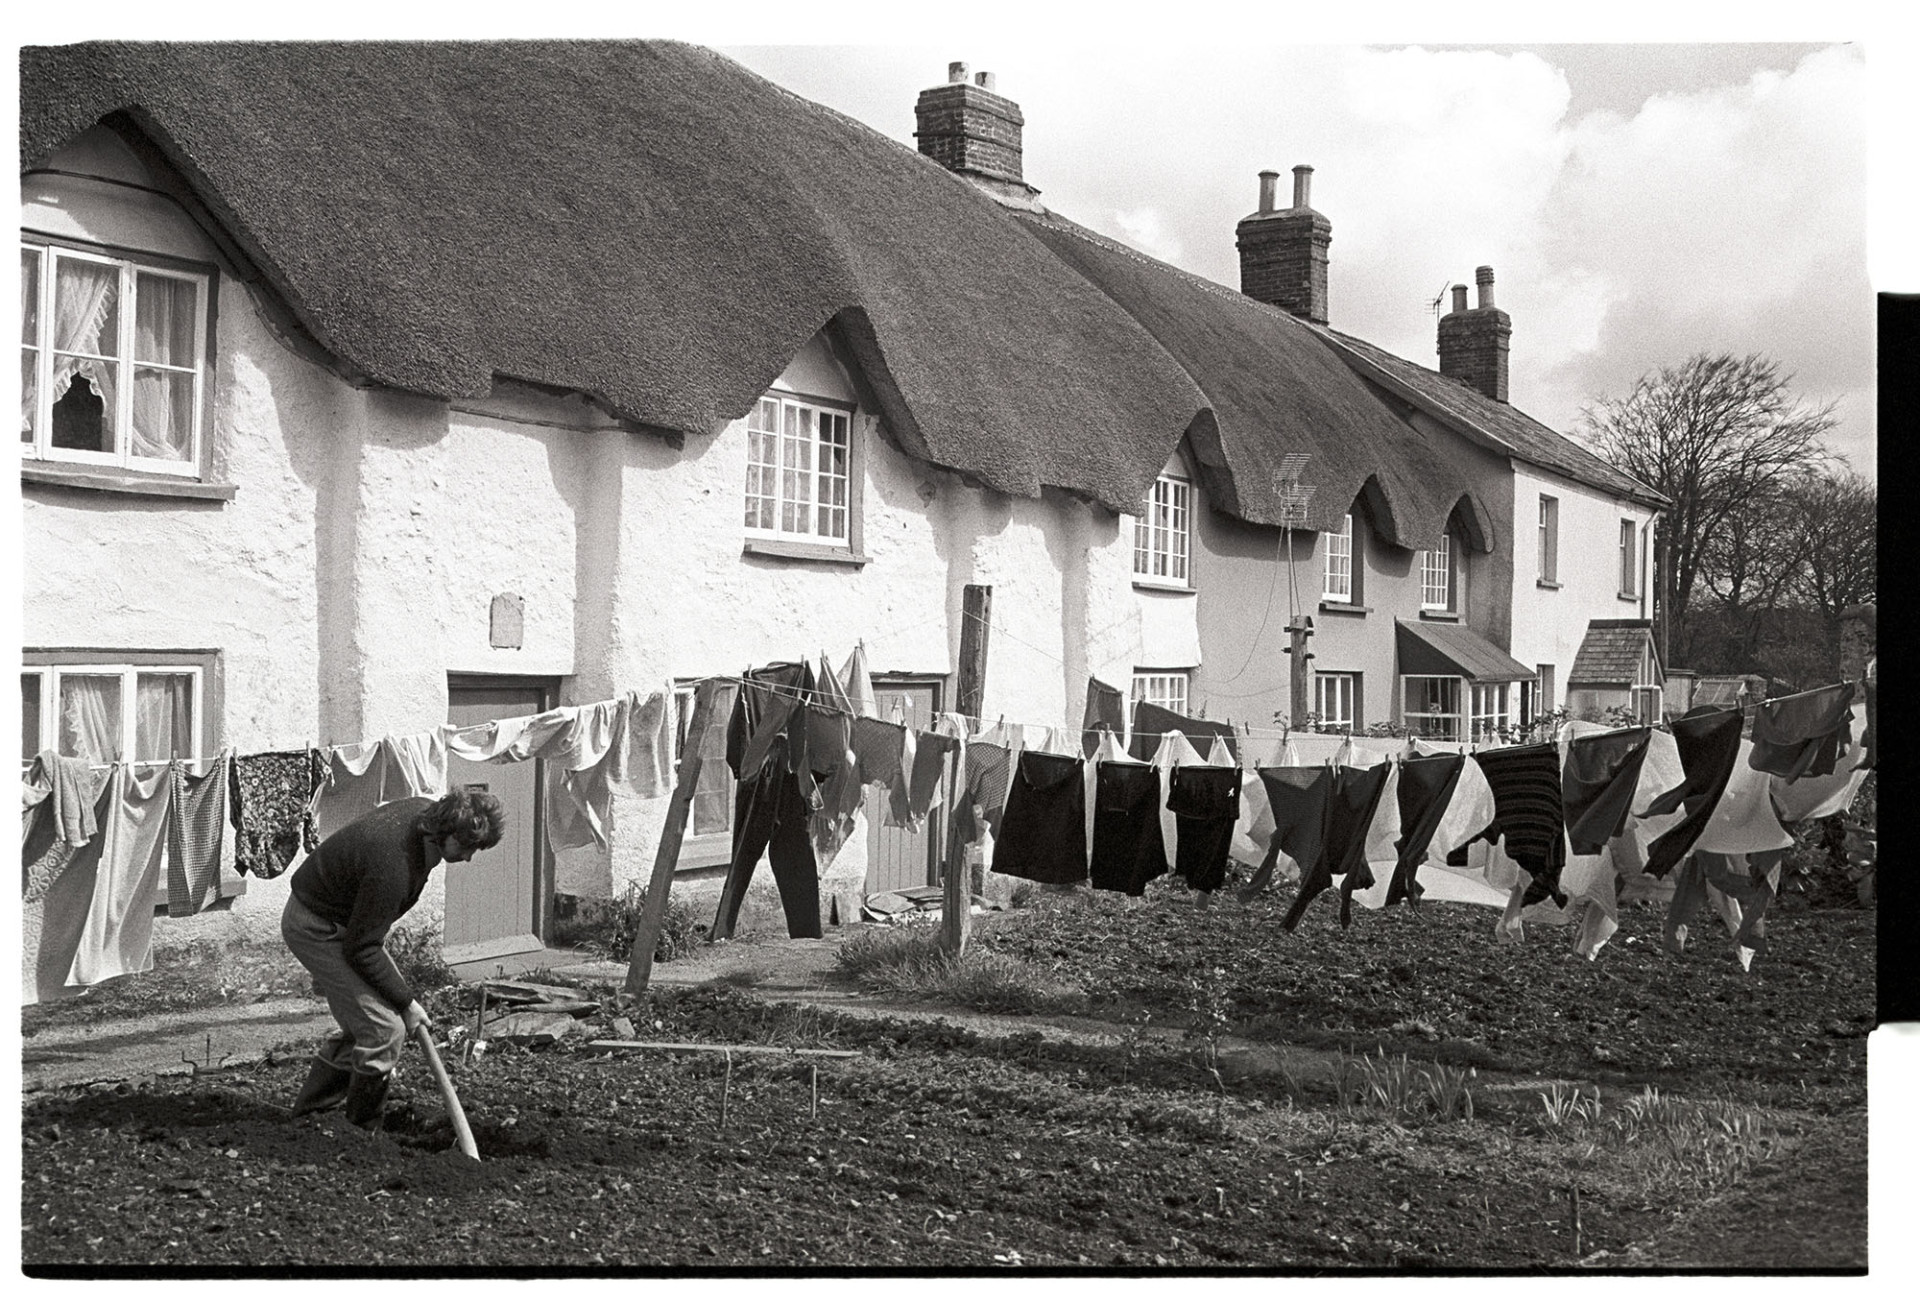 Thatched cottages with man gardening and washing on the line.
[A man digging in a garden by a row of thatched cottages in Dolton.  Three lines of washing are hung out to dry behind him.]